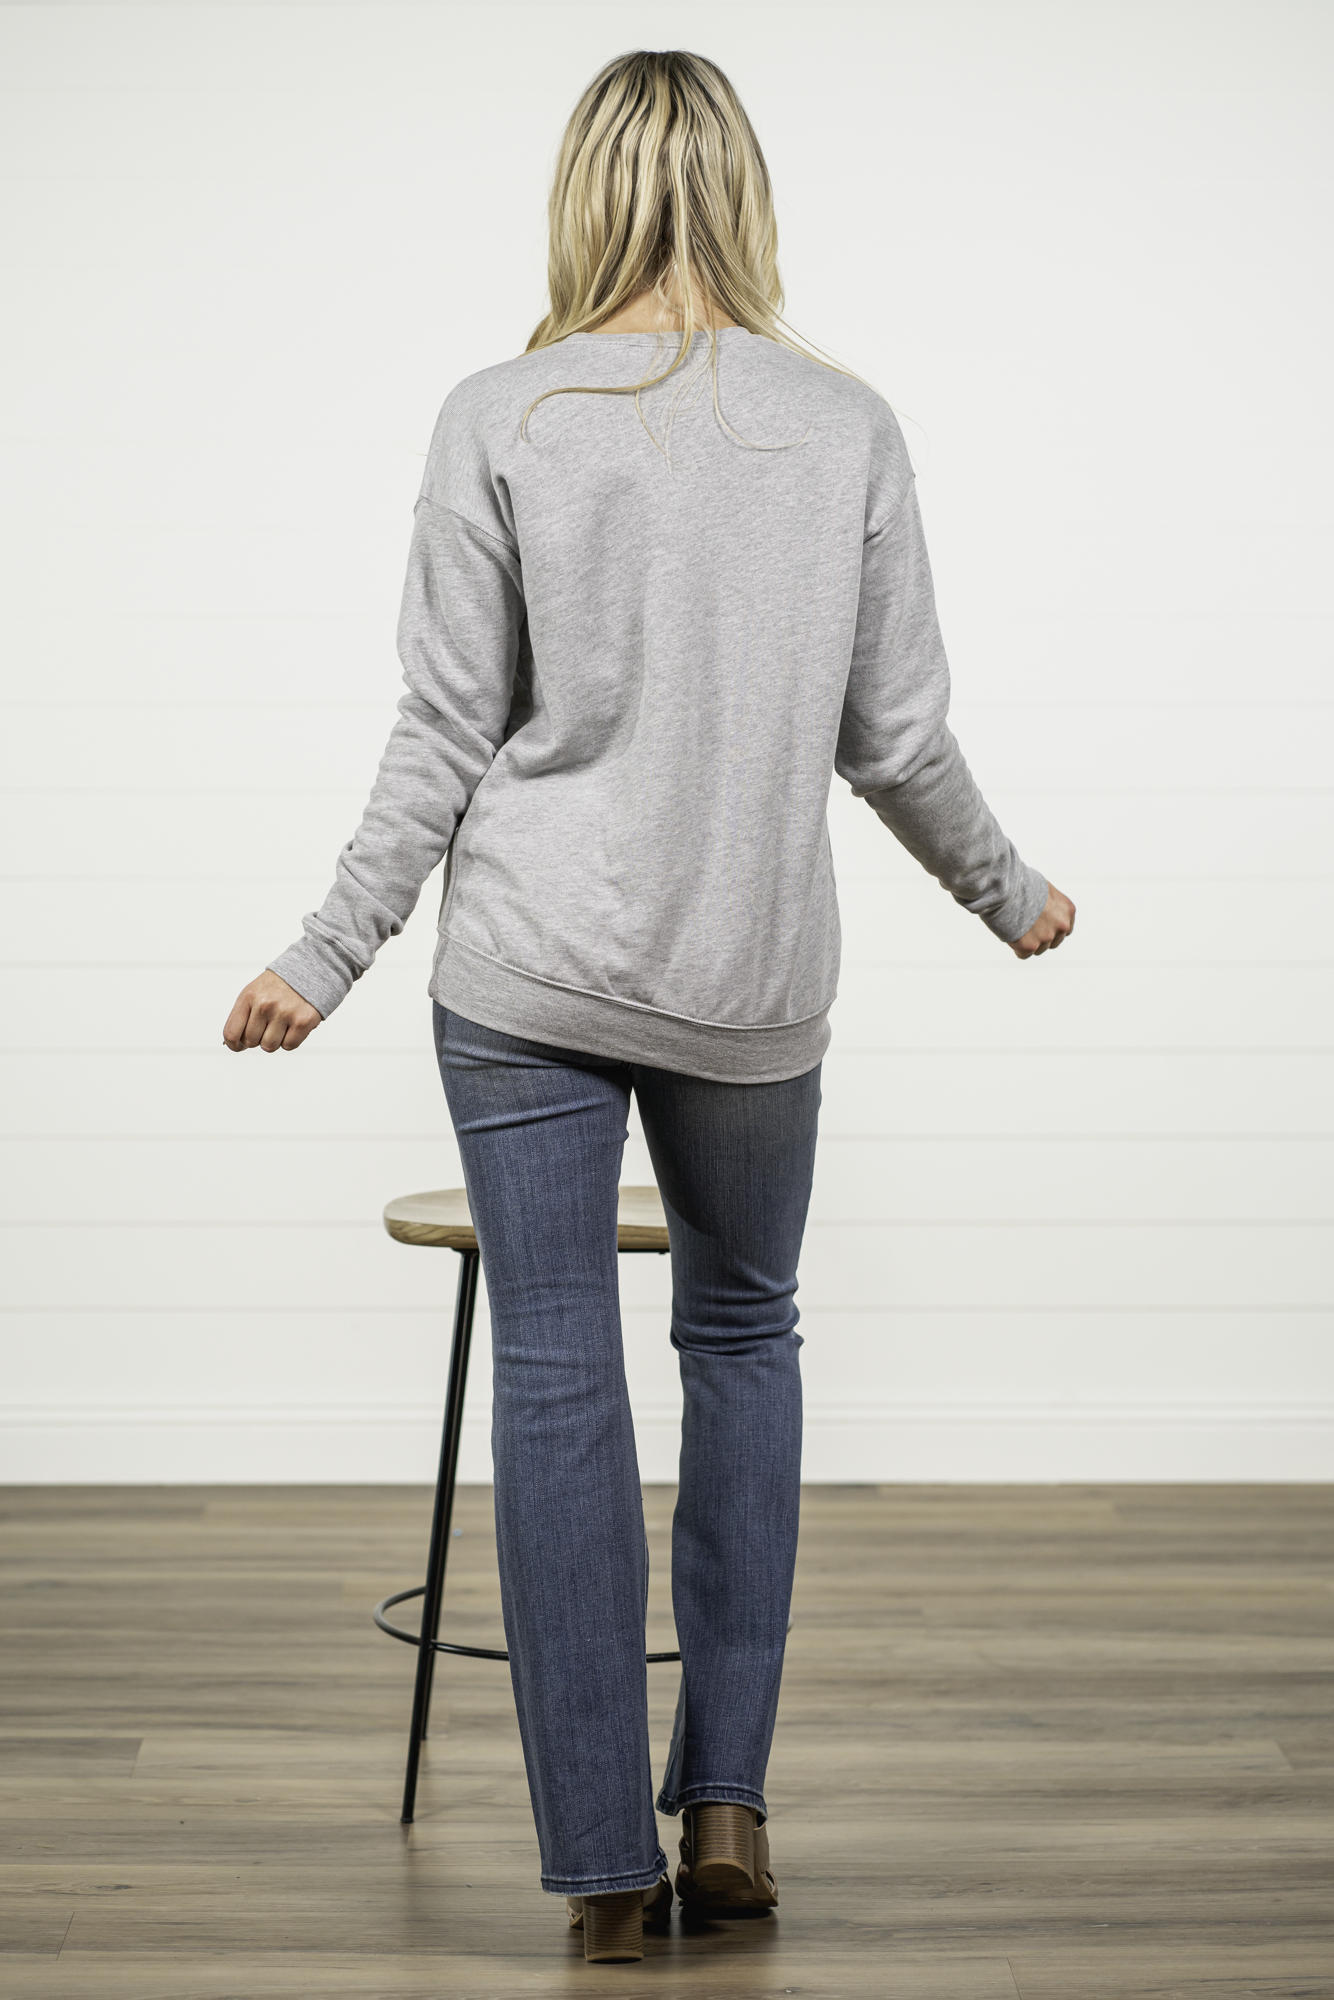 Blessed by Oat Collective   Graphic Fleece Pullover Sweater  Color: Heather Grey Neckline: Round  Sleeve: Long Sleeve Spun from plush sponge fleece fabric Ribbed Cuffed Wrist Bands Oversized Pull Over Style #: OT2112L711 Contact us for any additional measurements or sizing.  